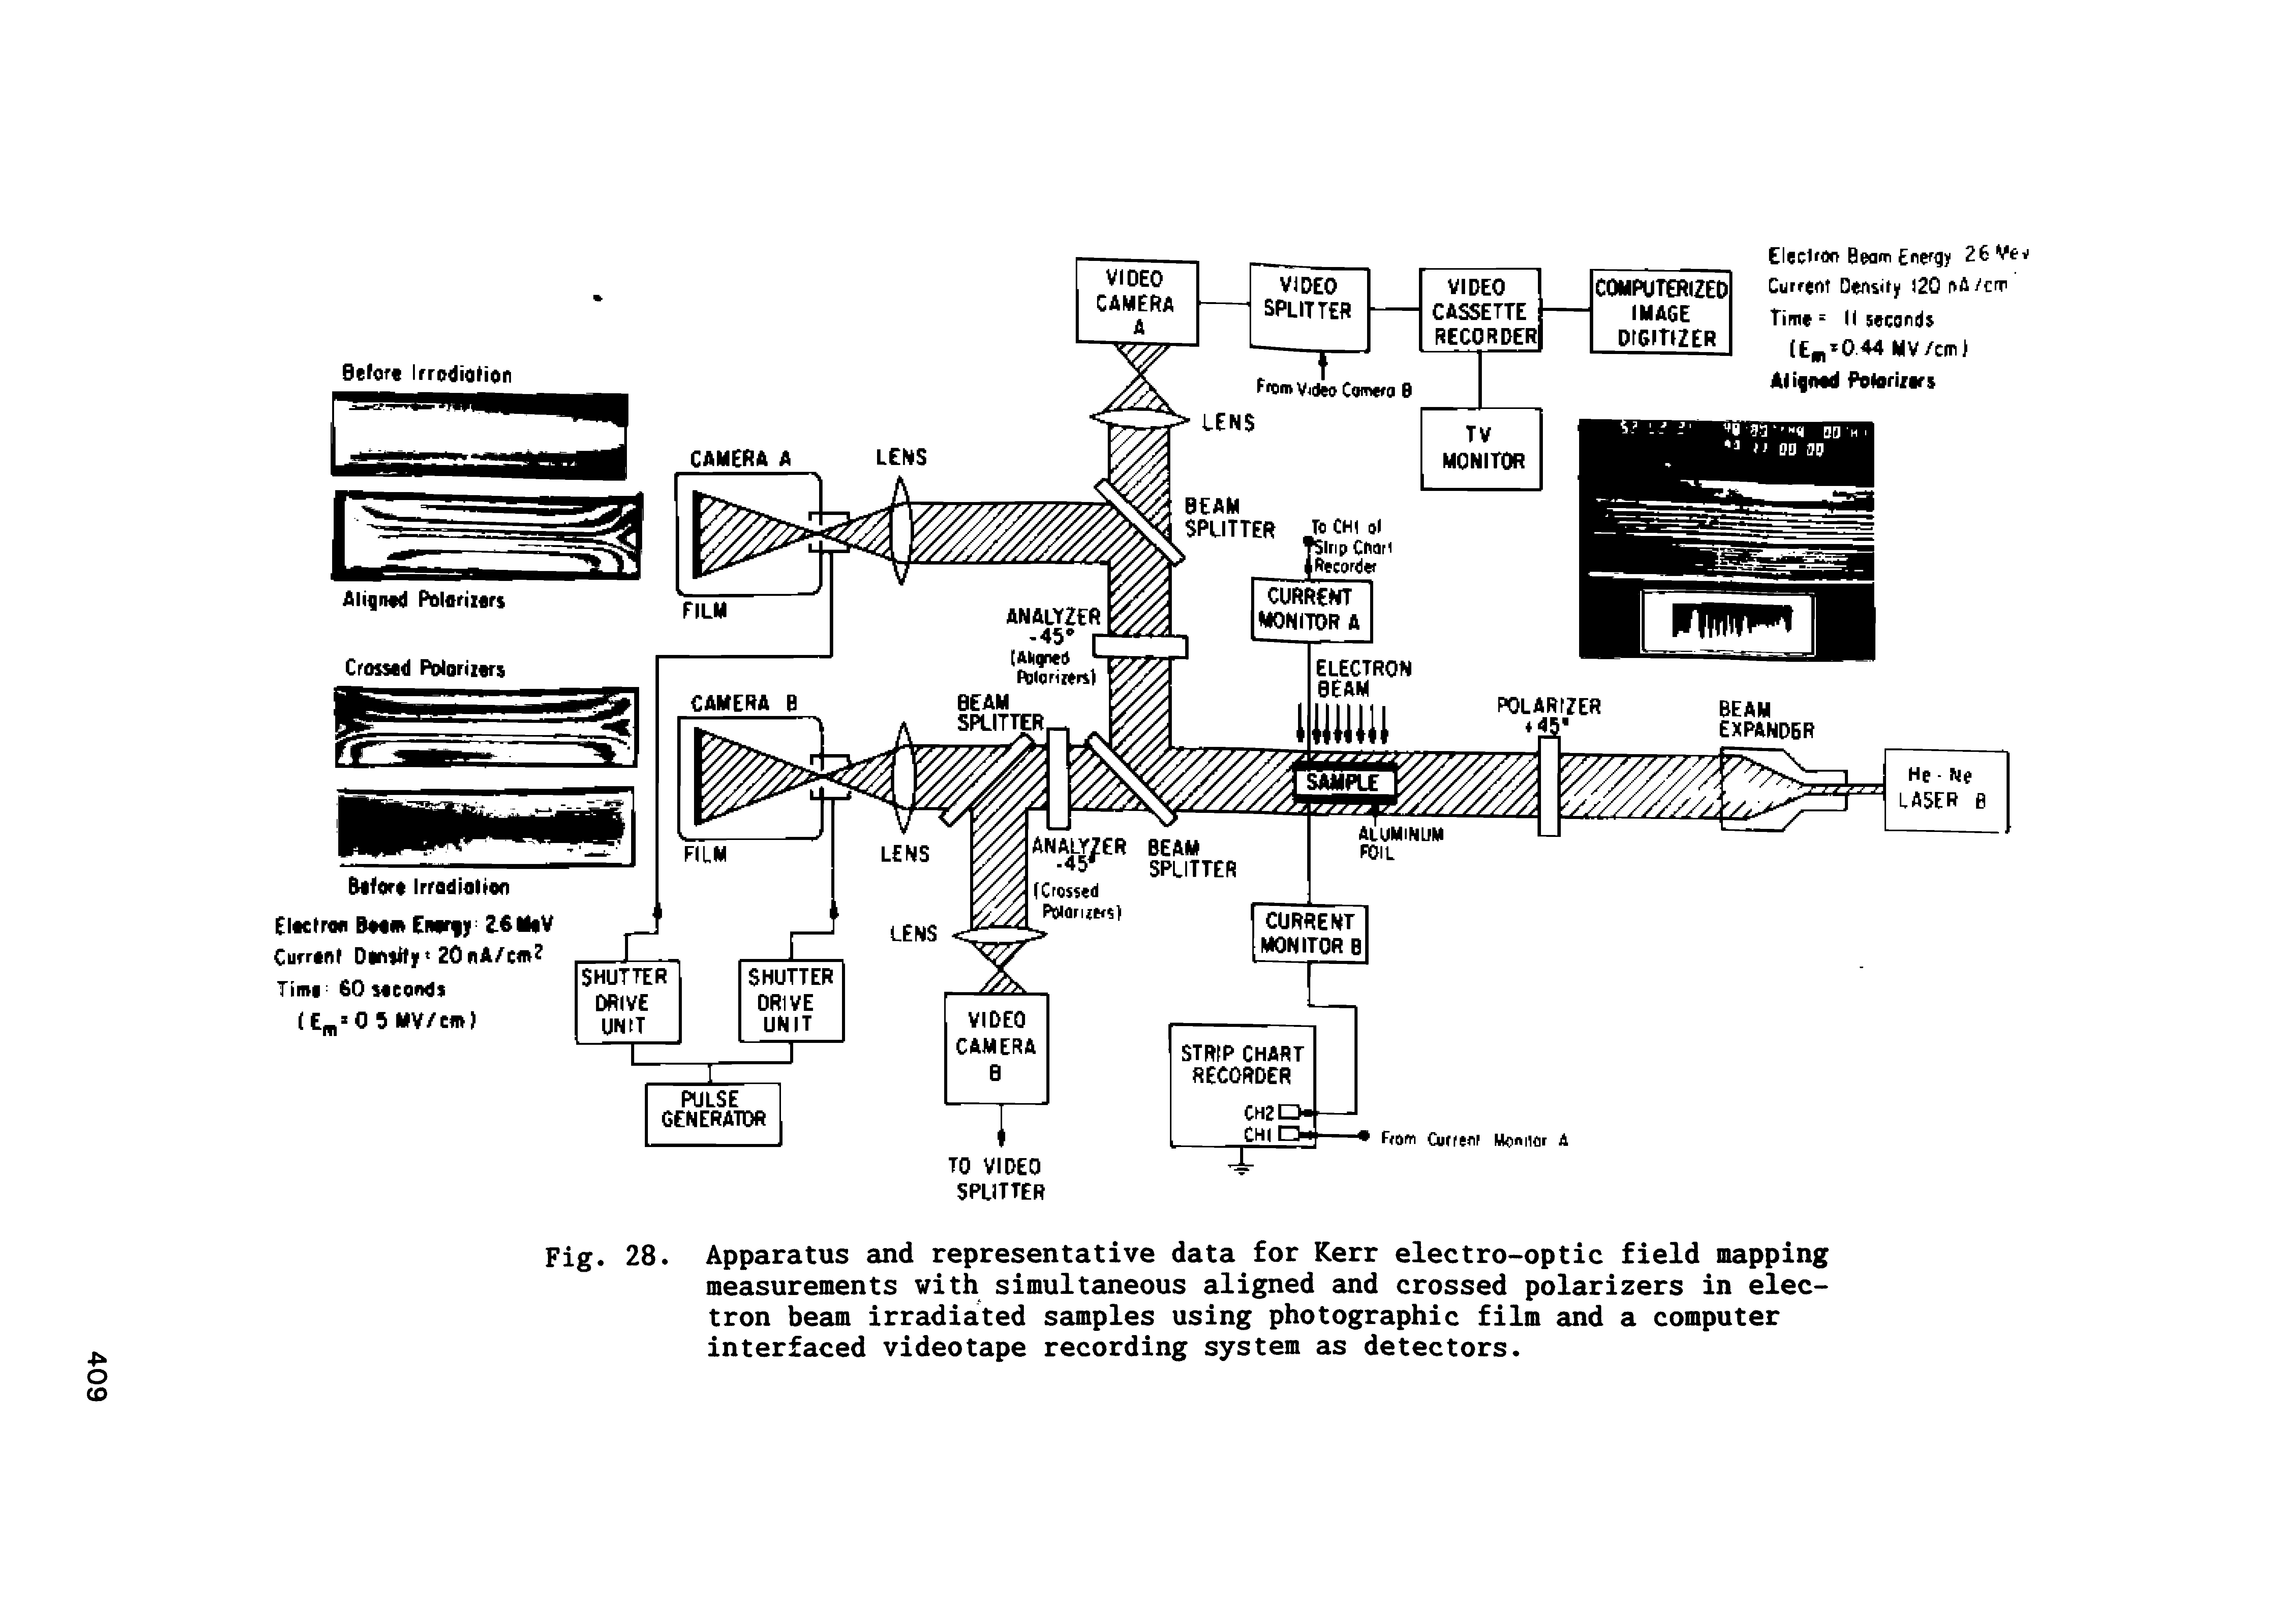 Fig. 28. Apparatus and representative data for Kerr electro-optic field mapping measurements with simultaneous aligned and crossed polarizers in electron beam irradiated samples using photographic film and a computer interfaced videotape recording system as detectors.